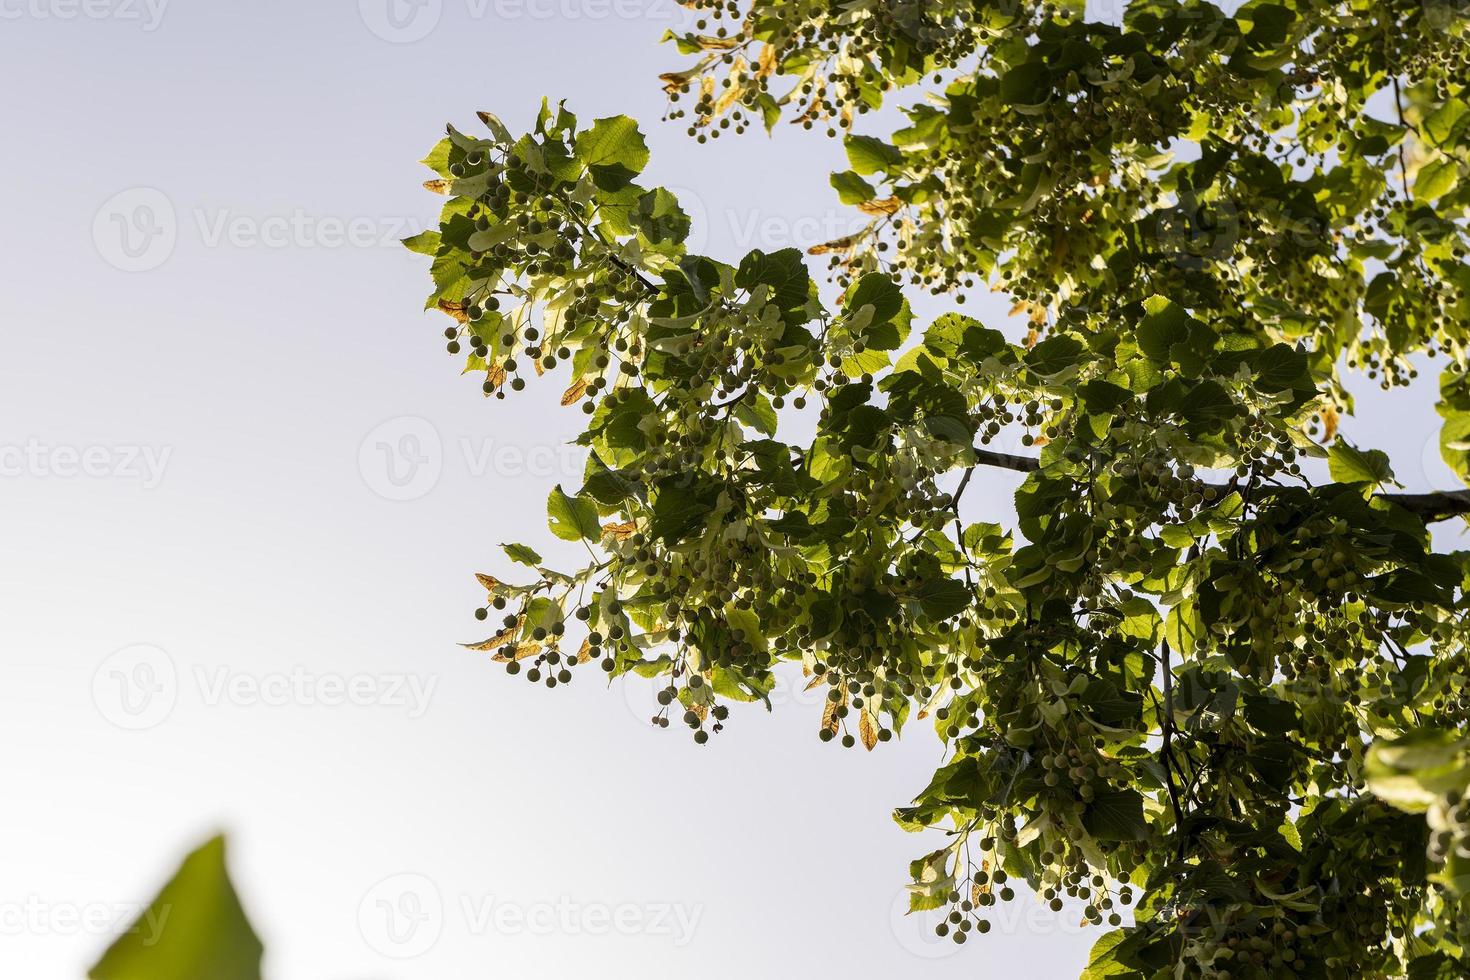 Linden tree at the end of the summer season photo